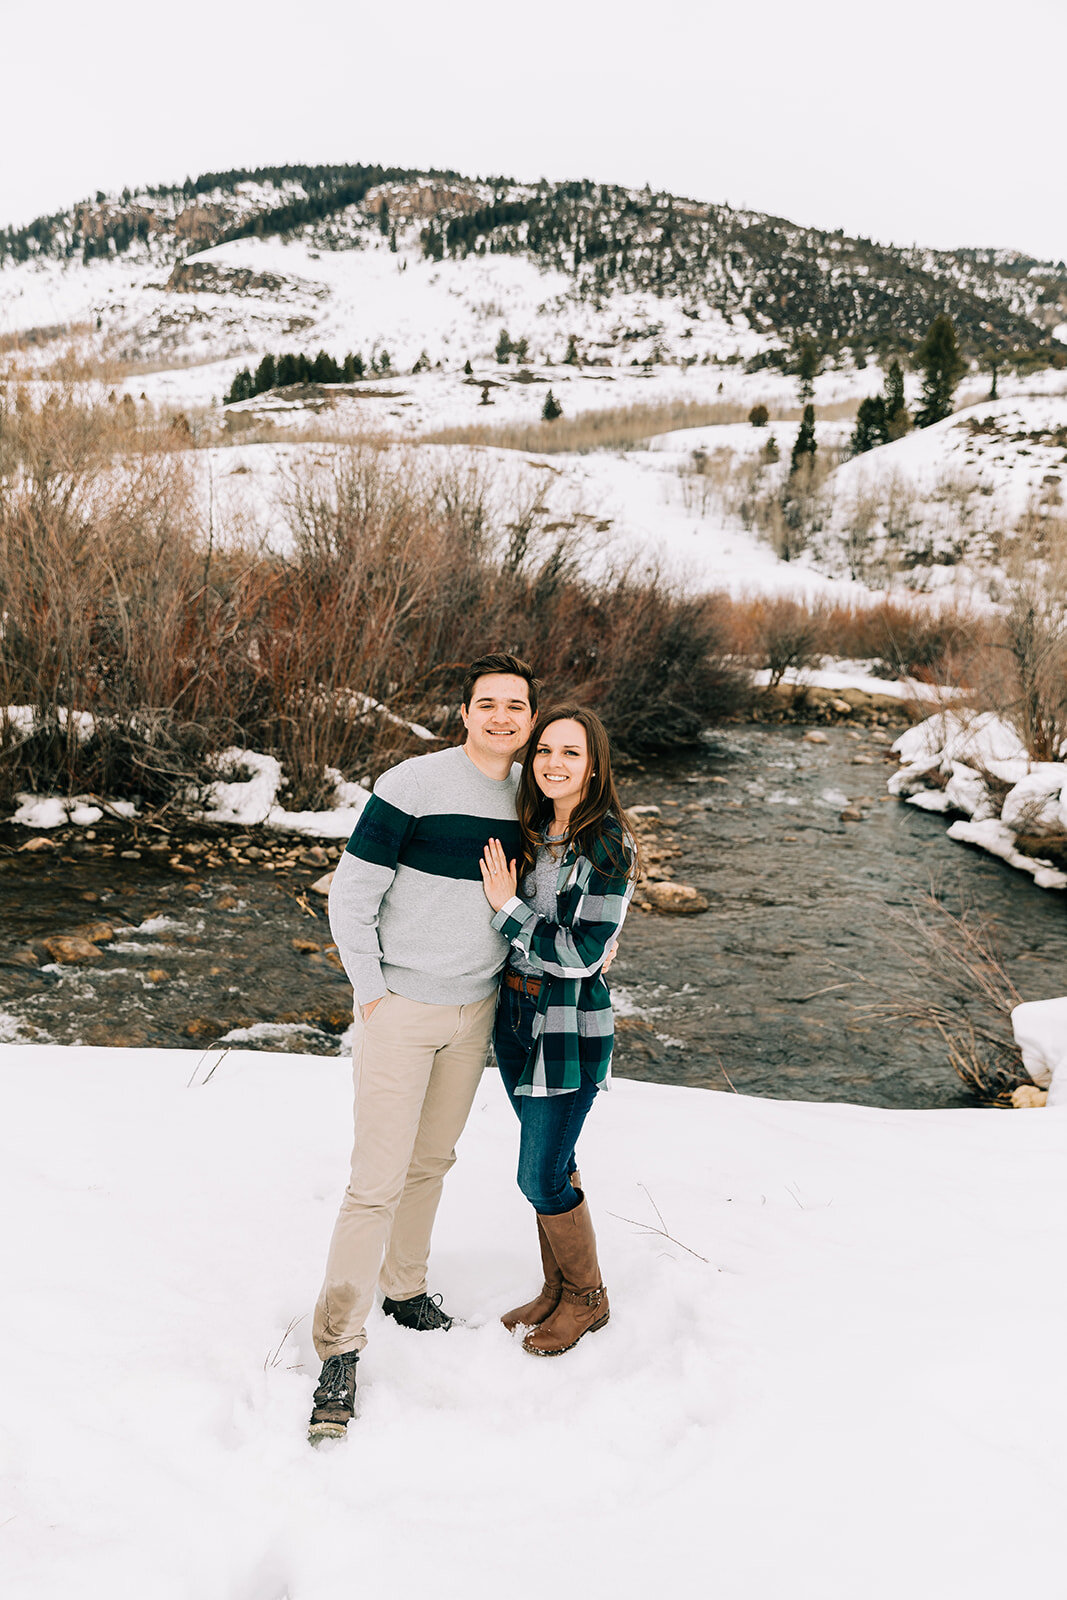  winter engagement session in tony’s grove logan canyon winter engagement session attire casual men and women winter attire for outdoor photo shoot session grey and blue outfit inspiration women hairstyle inspiration for engagement sessions logan cou